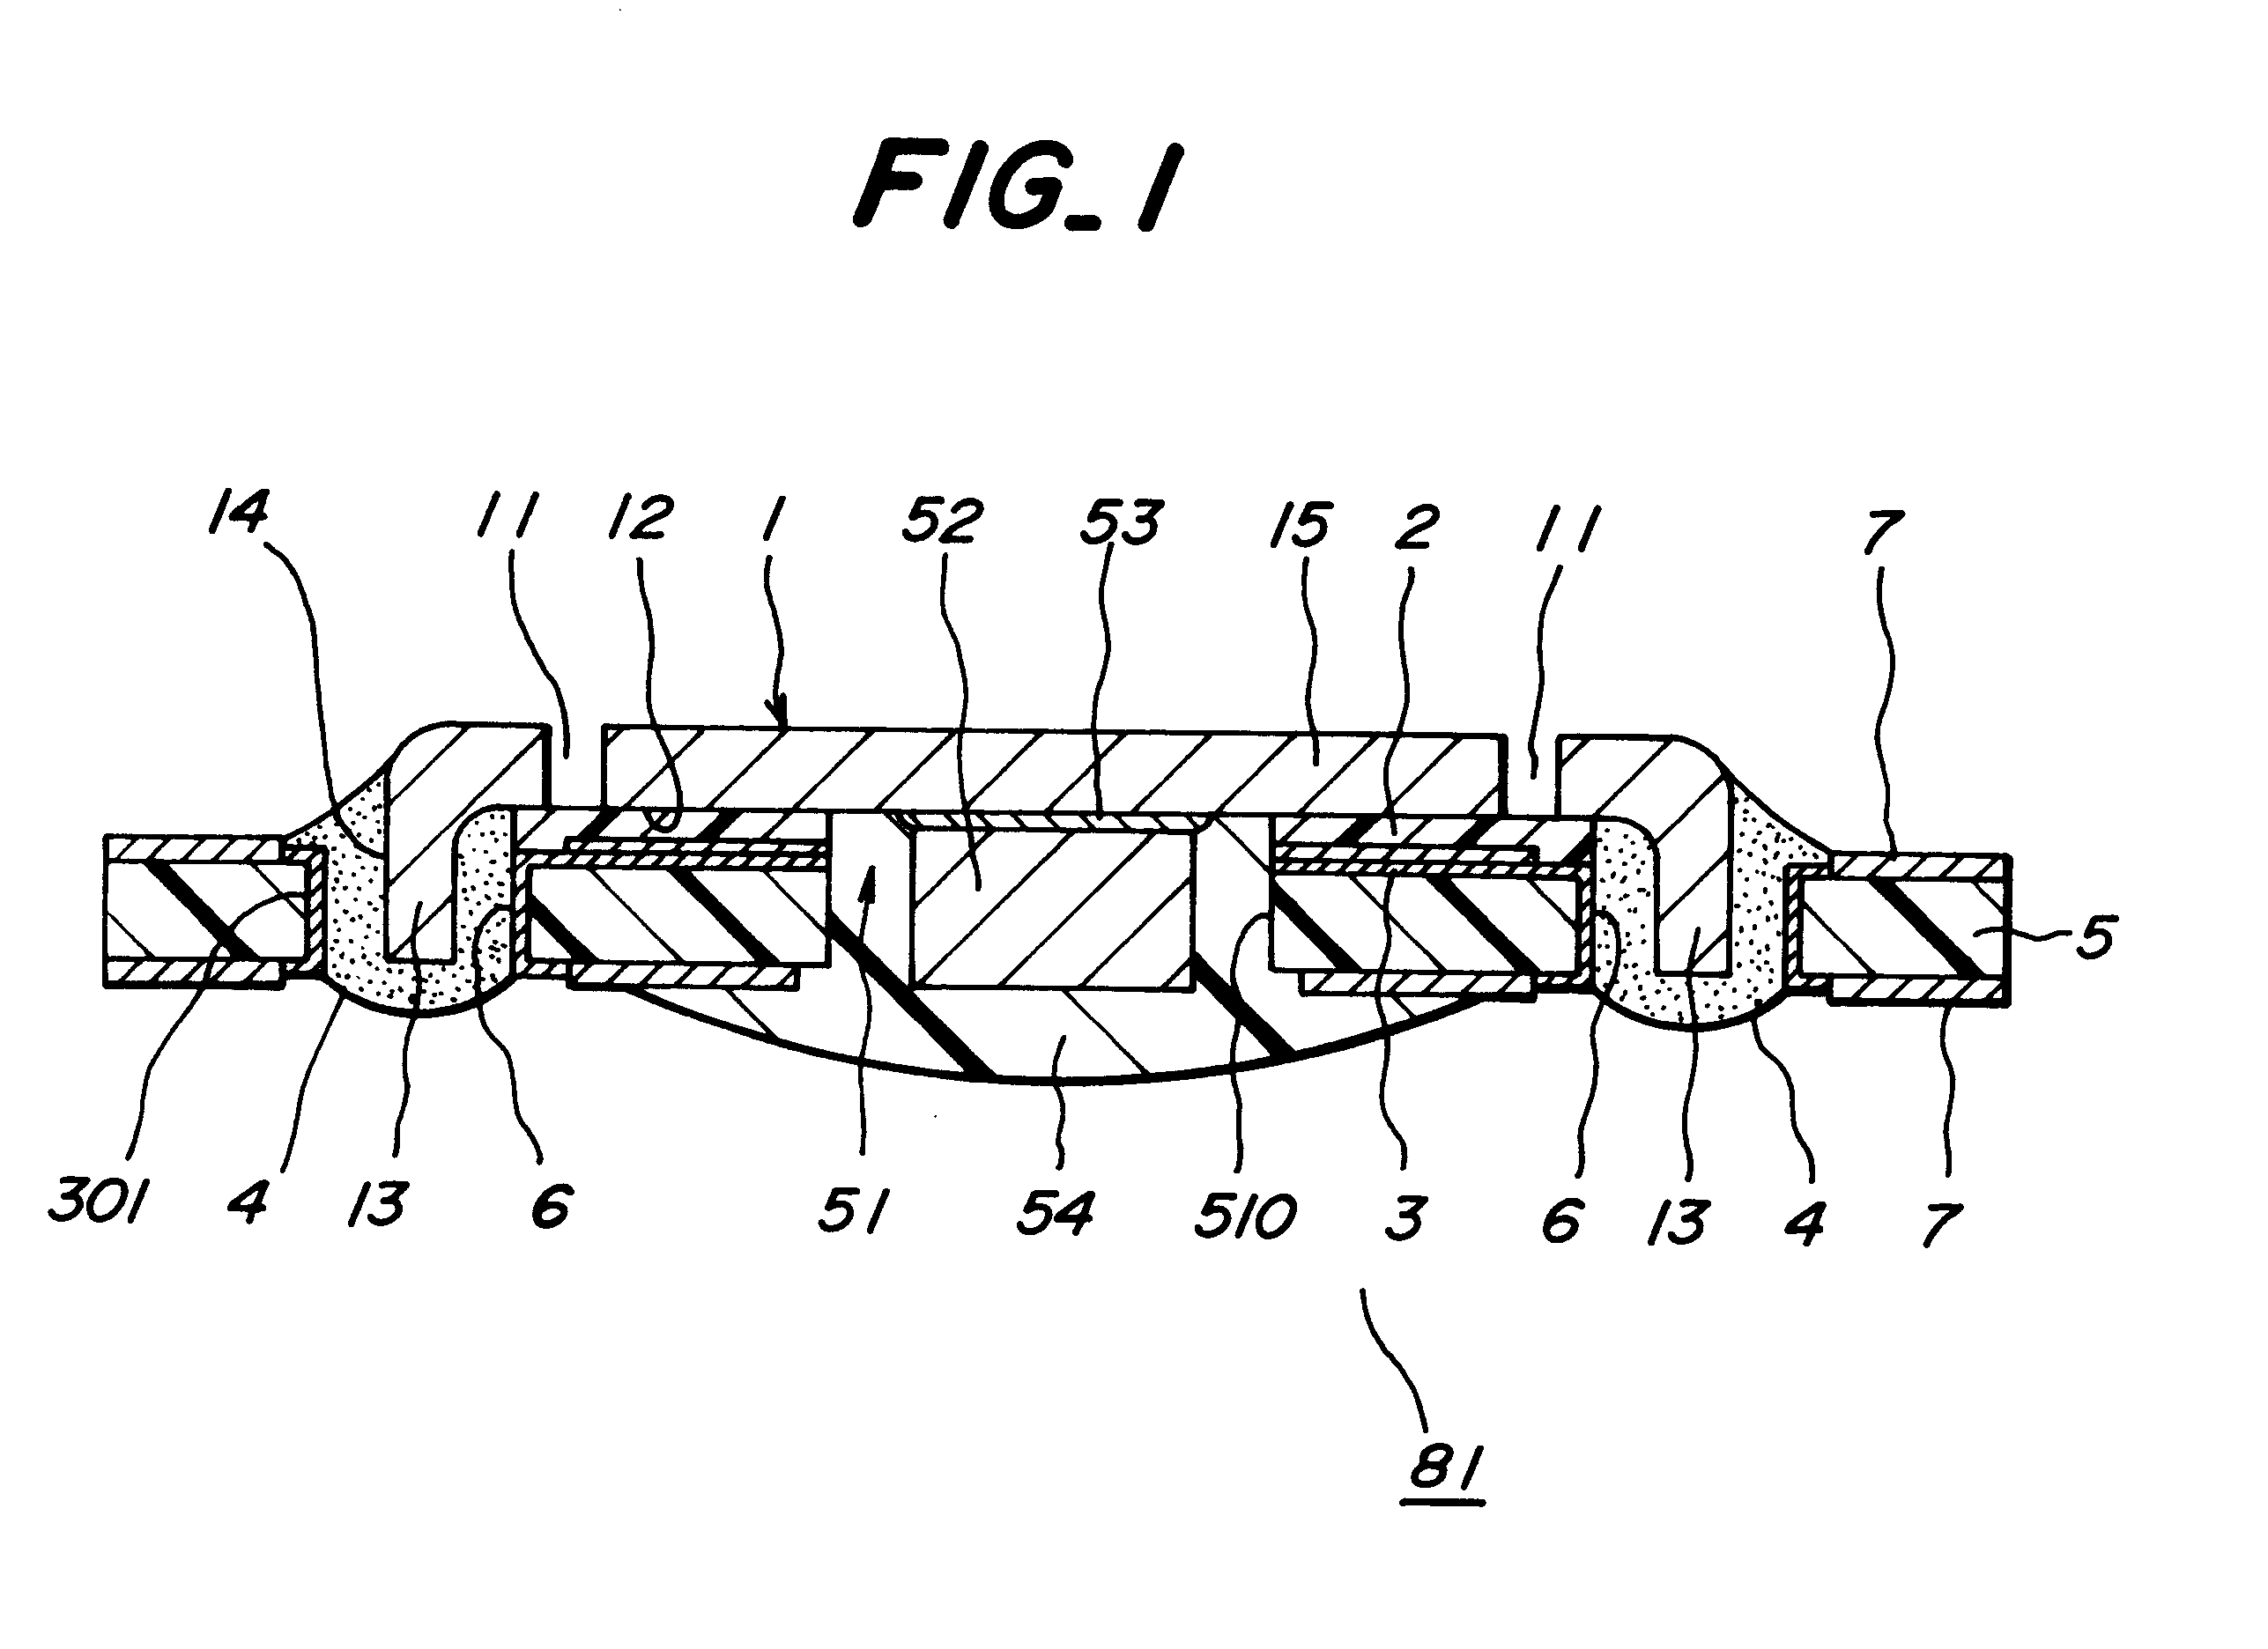 Electronic component mounting base board having heat slug with slits and projections